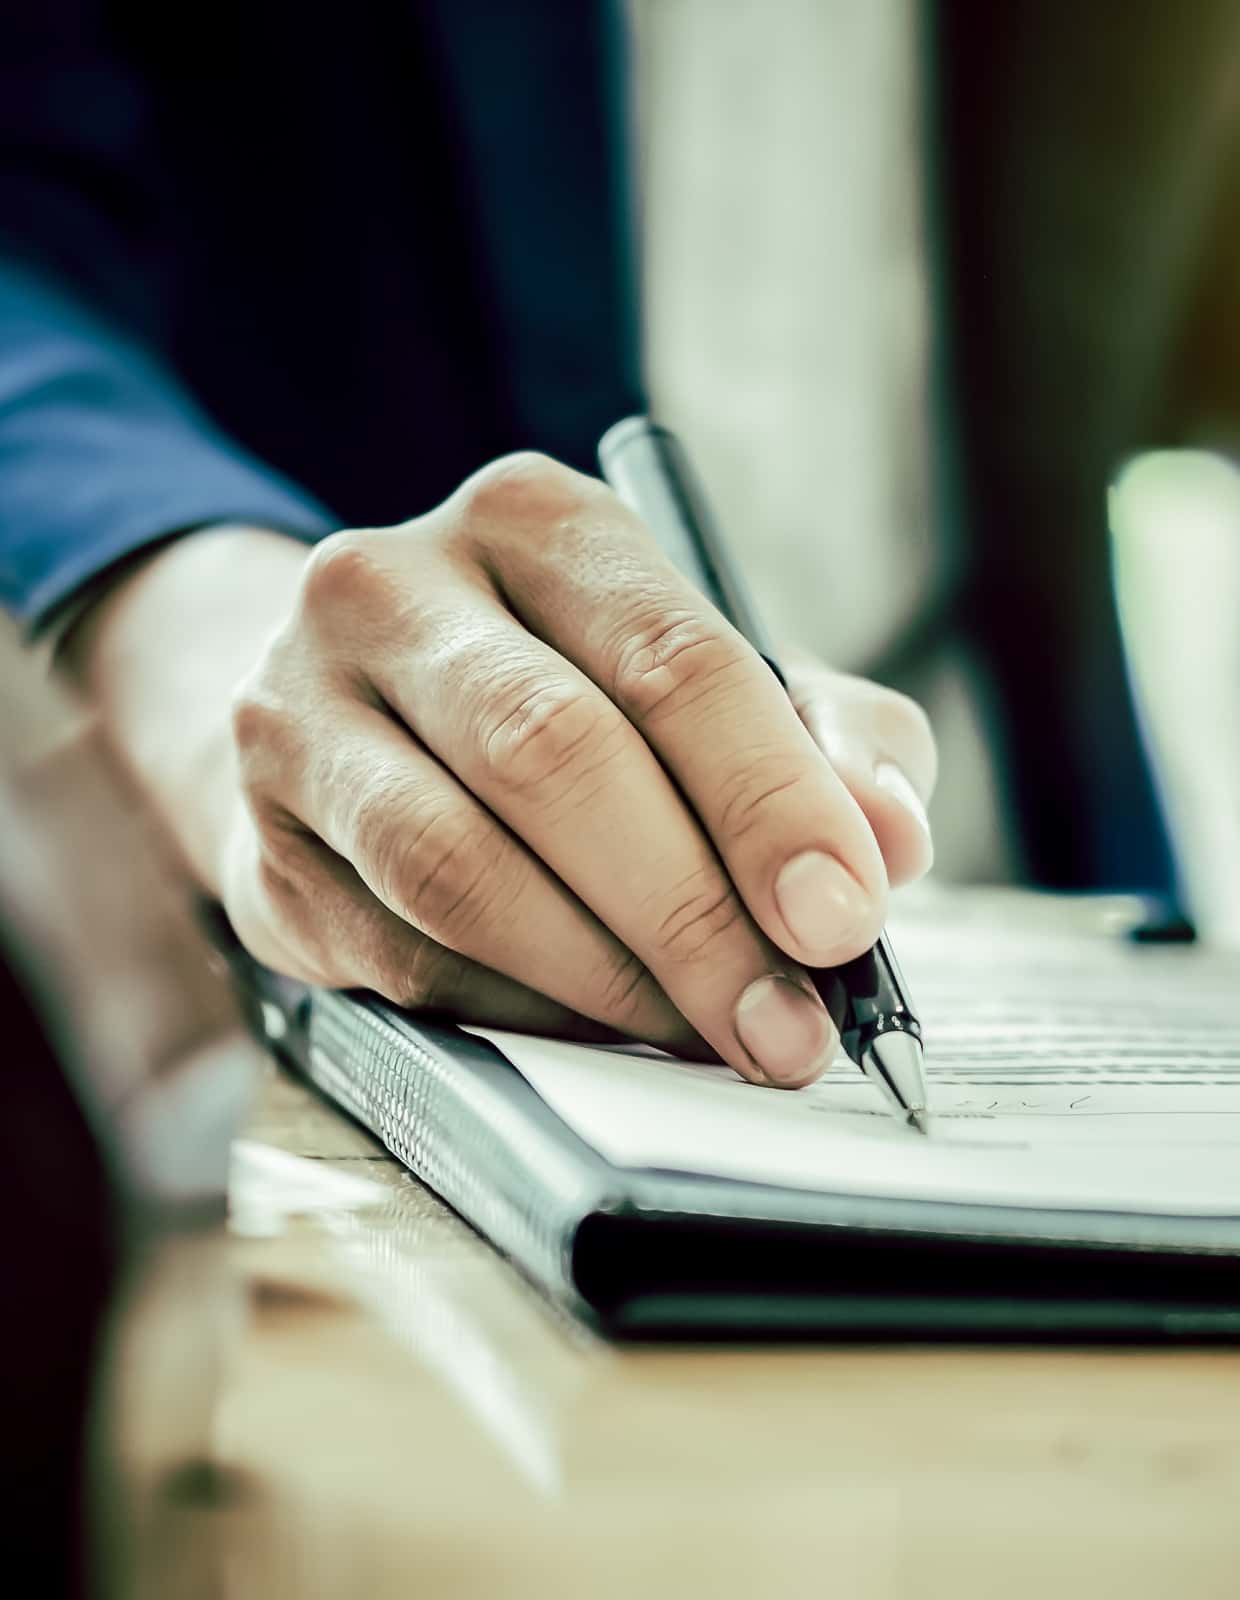 A close-up of a hand with a pen reviewing a document.